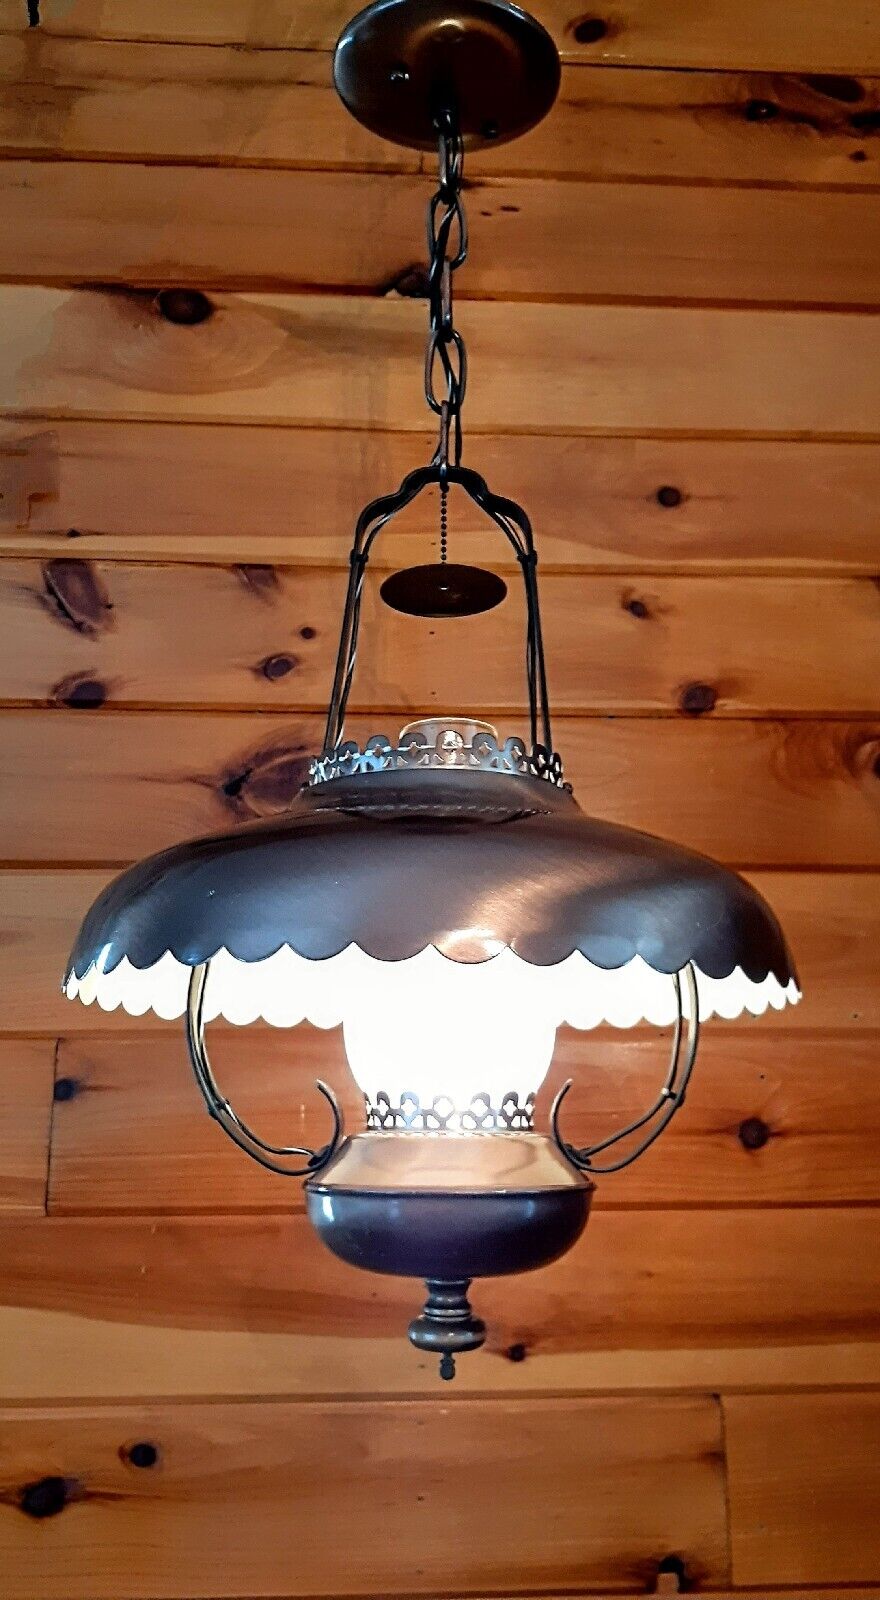 Vintage/Antique 1950's-70s Rustic Country Western Lantern Style Chandelier Light